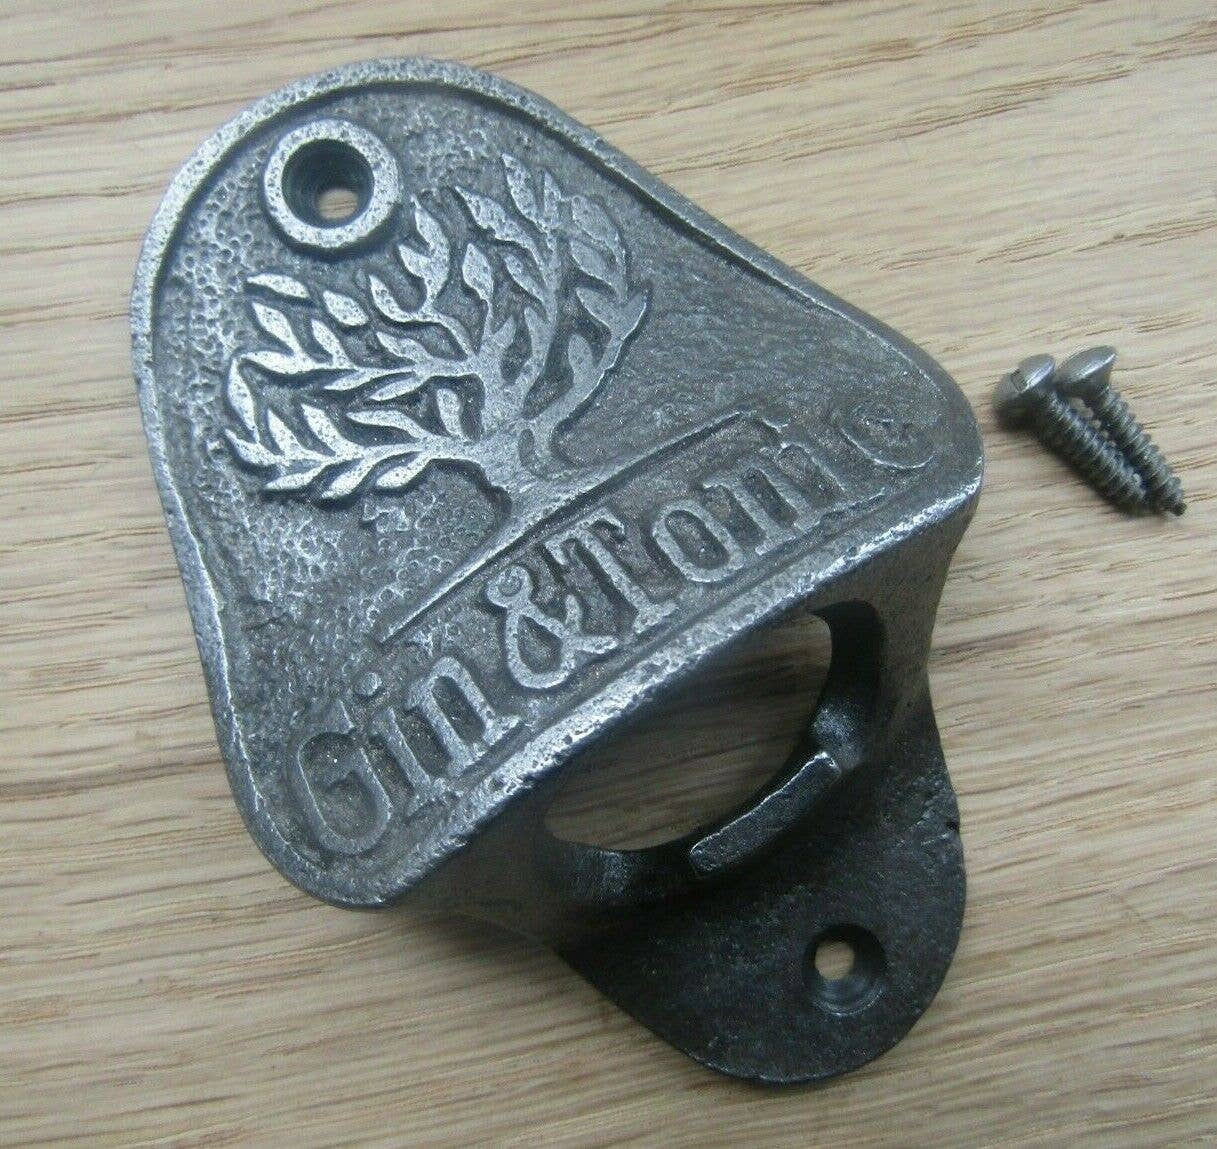 FIXINGS ** FREE P&P** 1 x BOTTLE OPENER 'BREW DOG' CAST IRON WALL MOUNTED 